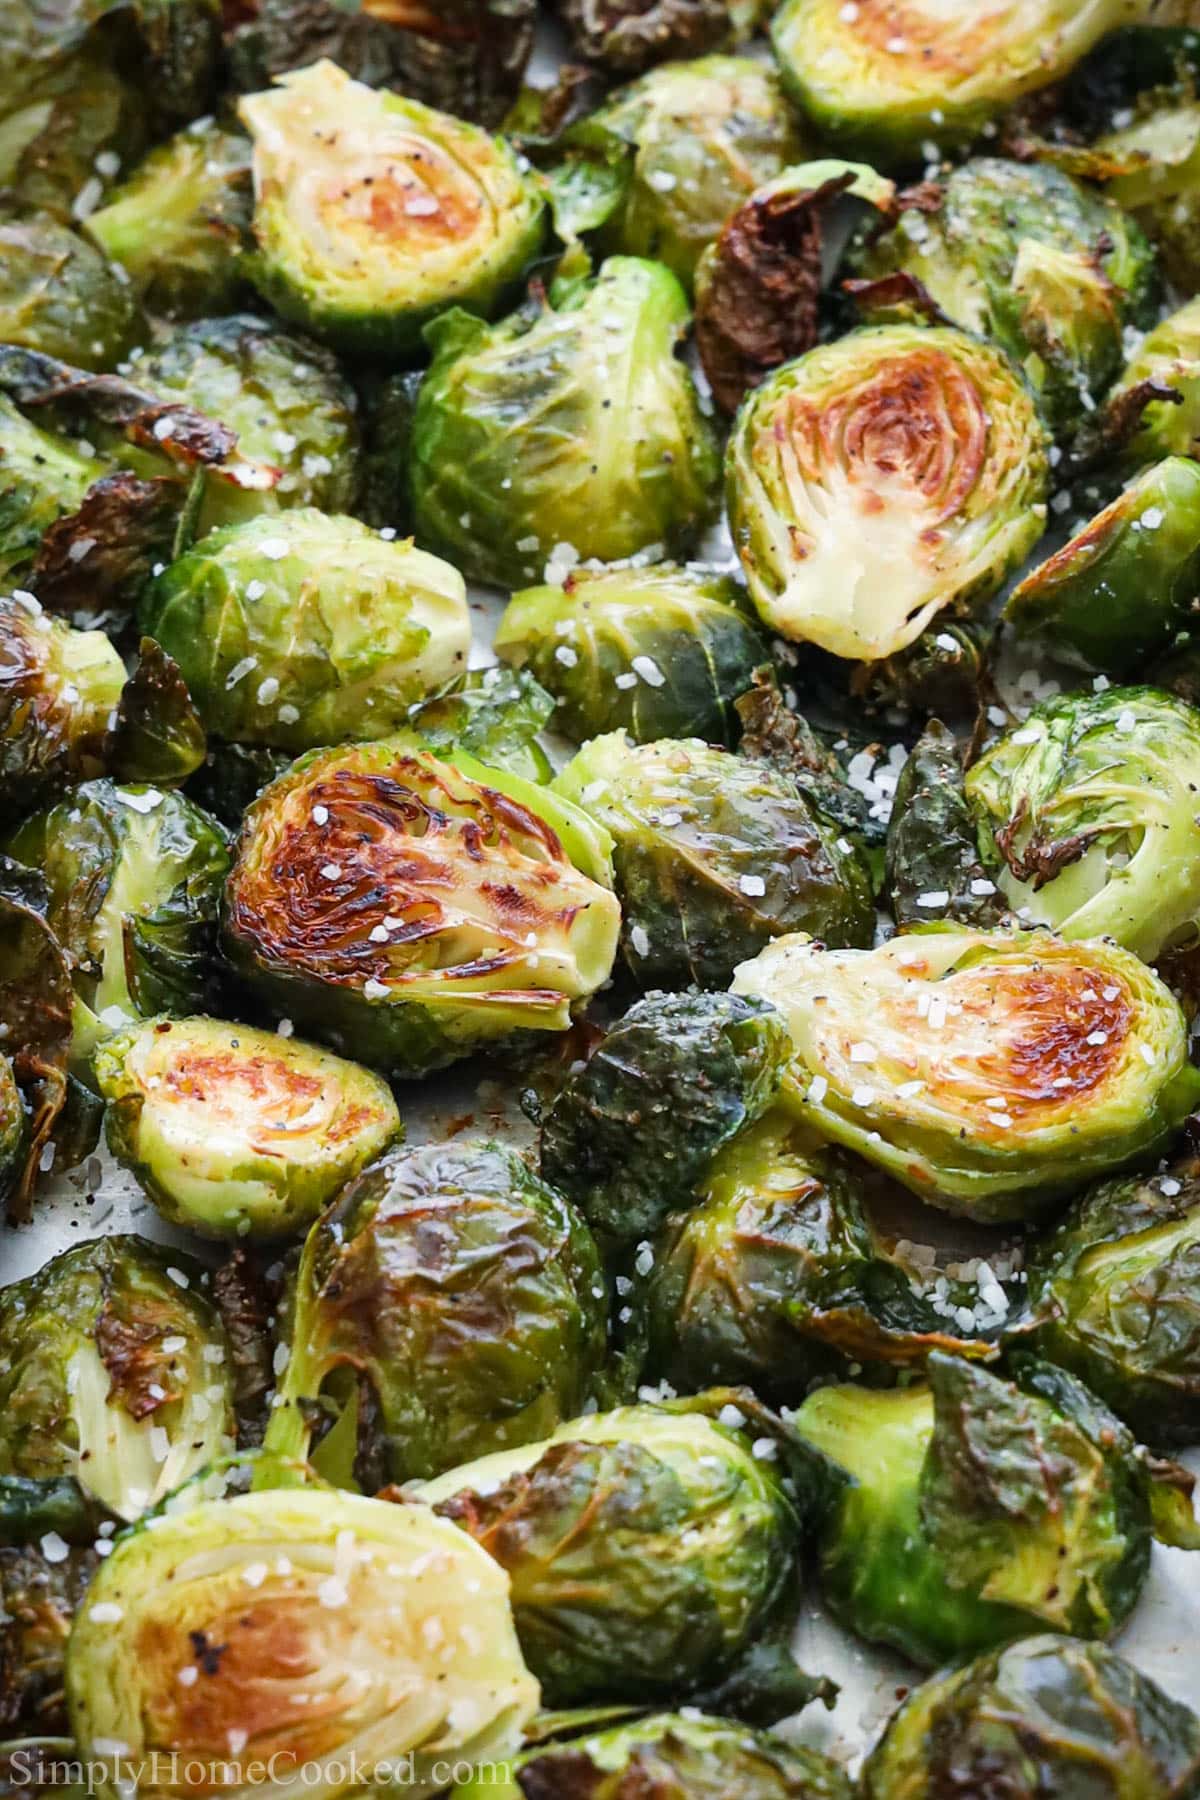 Roasted Brussels Sprouts – Simply Home Cooked